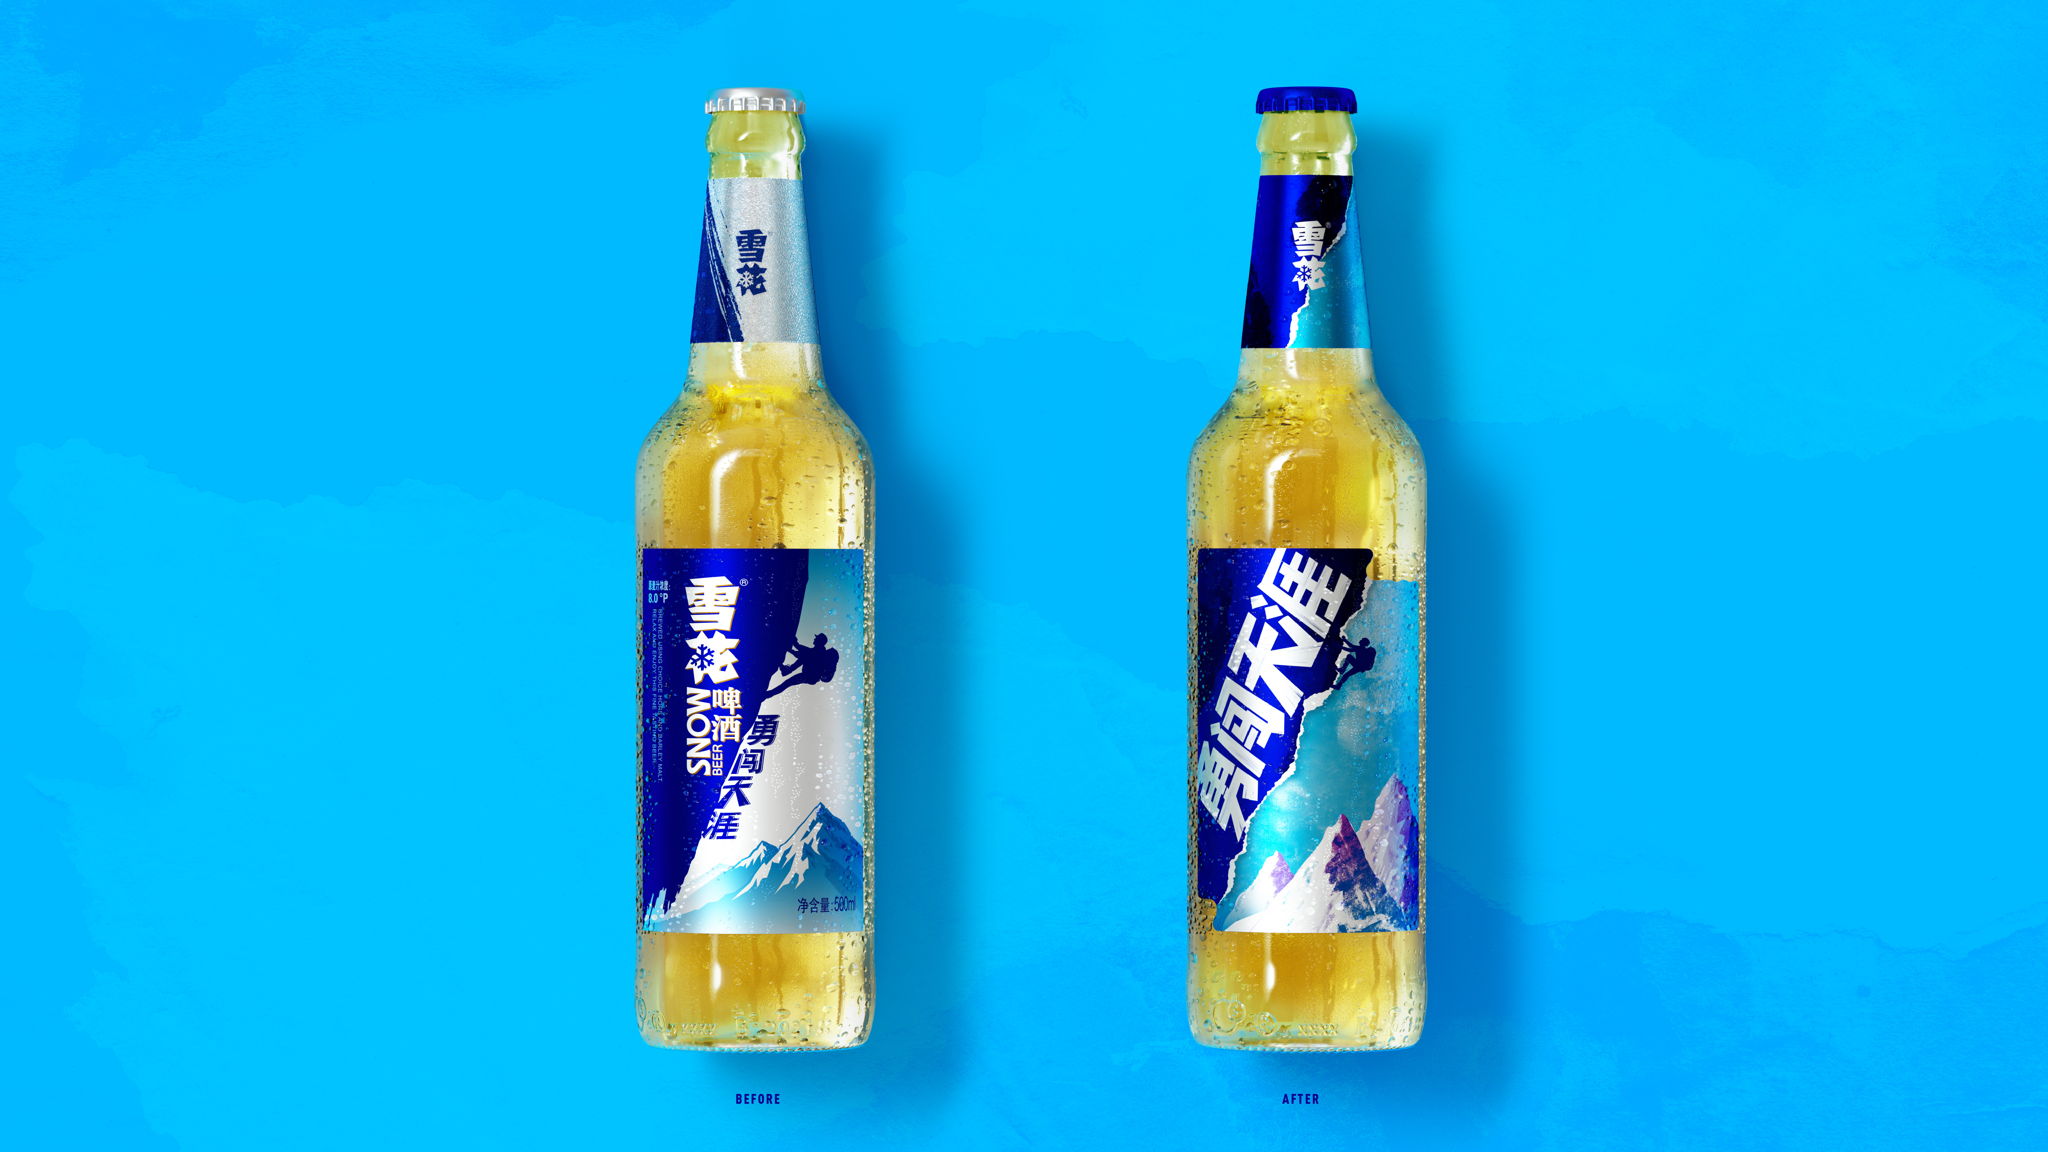 Pearlfisher Refreshes Snow Beer 'Brave The World' For Gen Z | Dieline ...